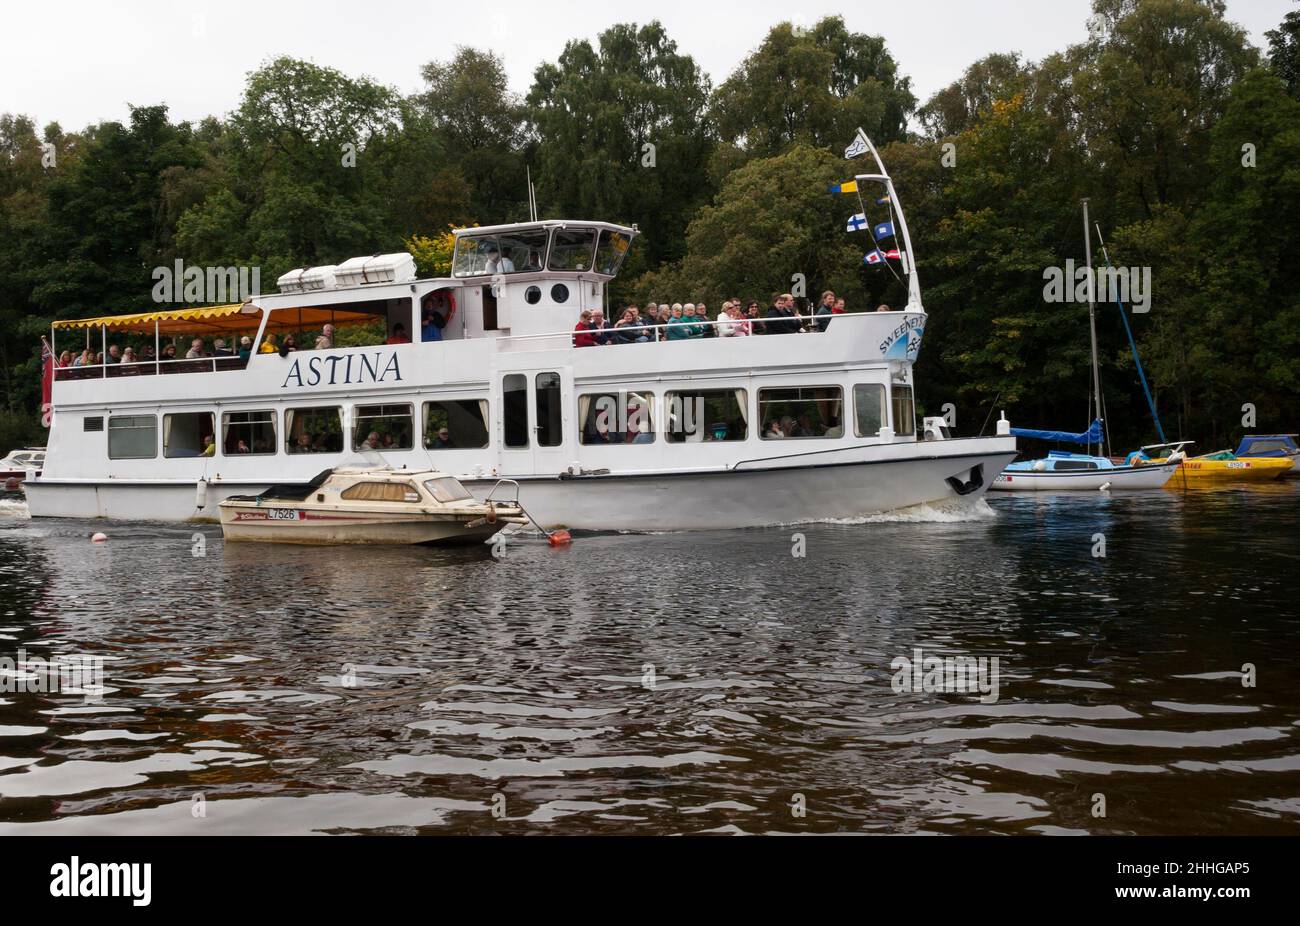 Tourist boat, Astina from Sweeney Cruises on the River Leven at Balloch heading to Loch Lomond, Scotland Stock Photo